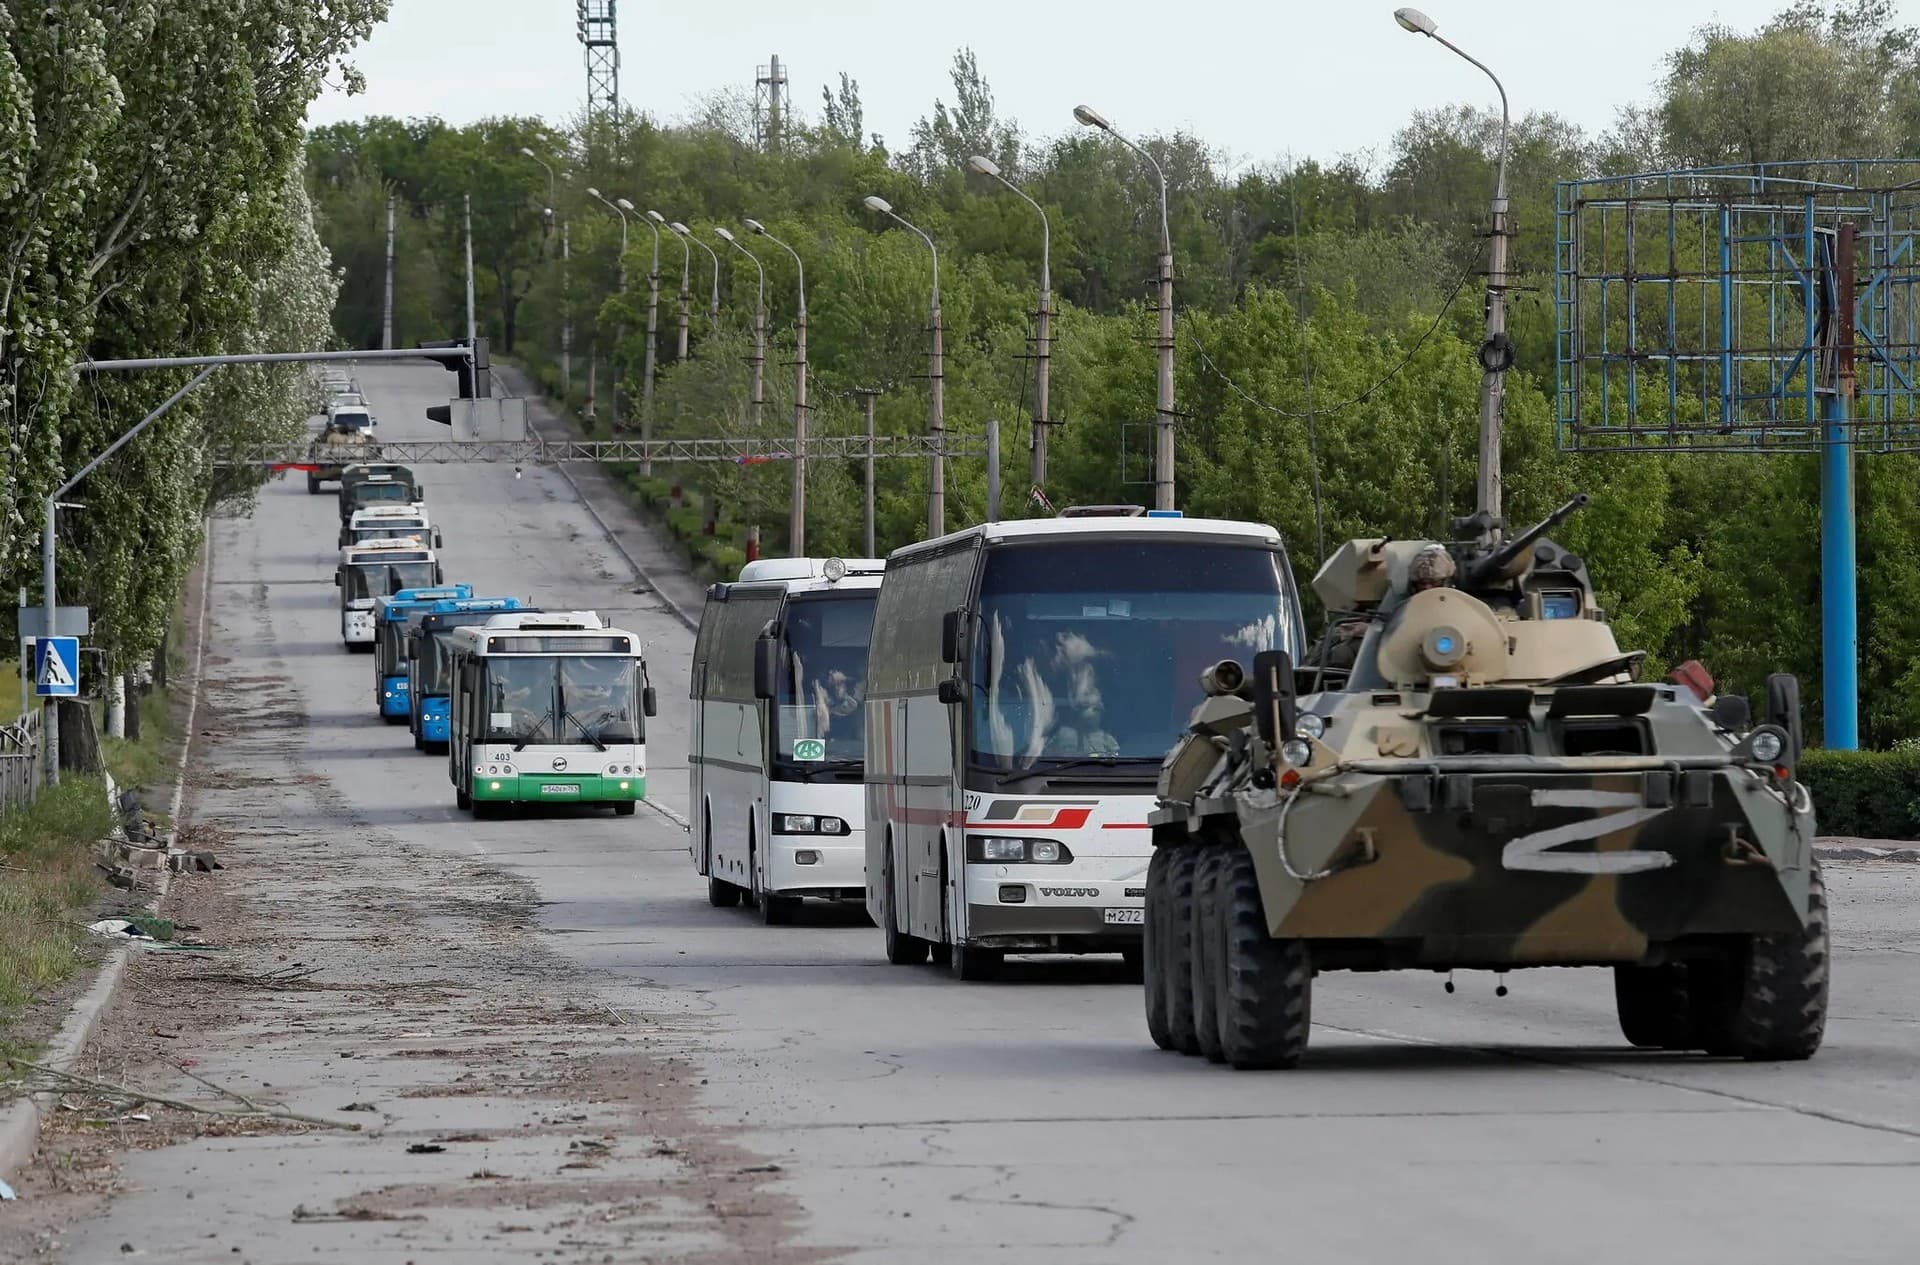 Buses carrying Ukrainian service members who surrendered at the Azovstal steel plant in Mariupol